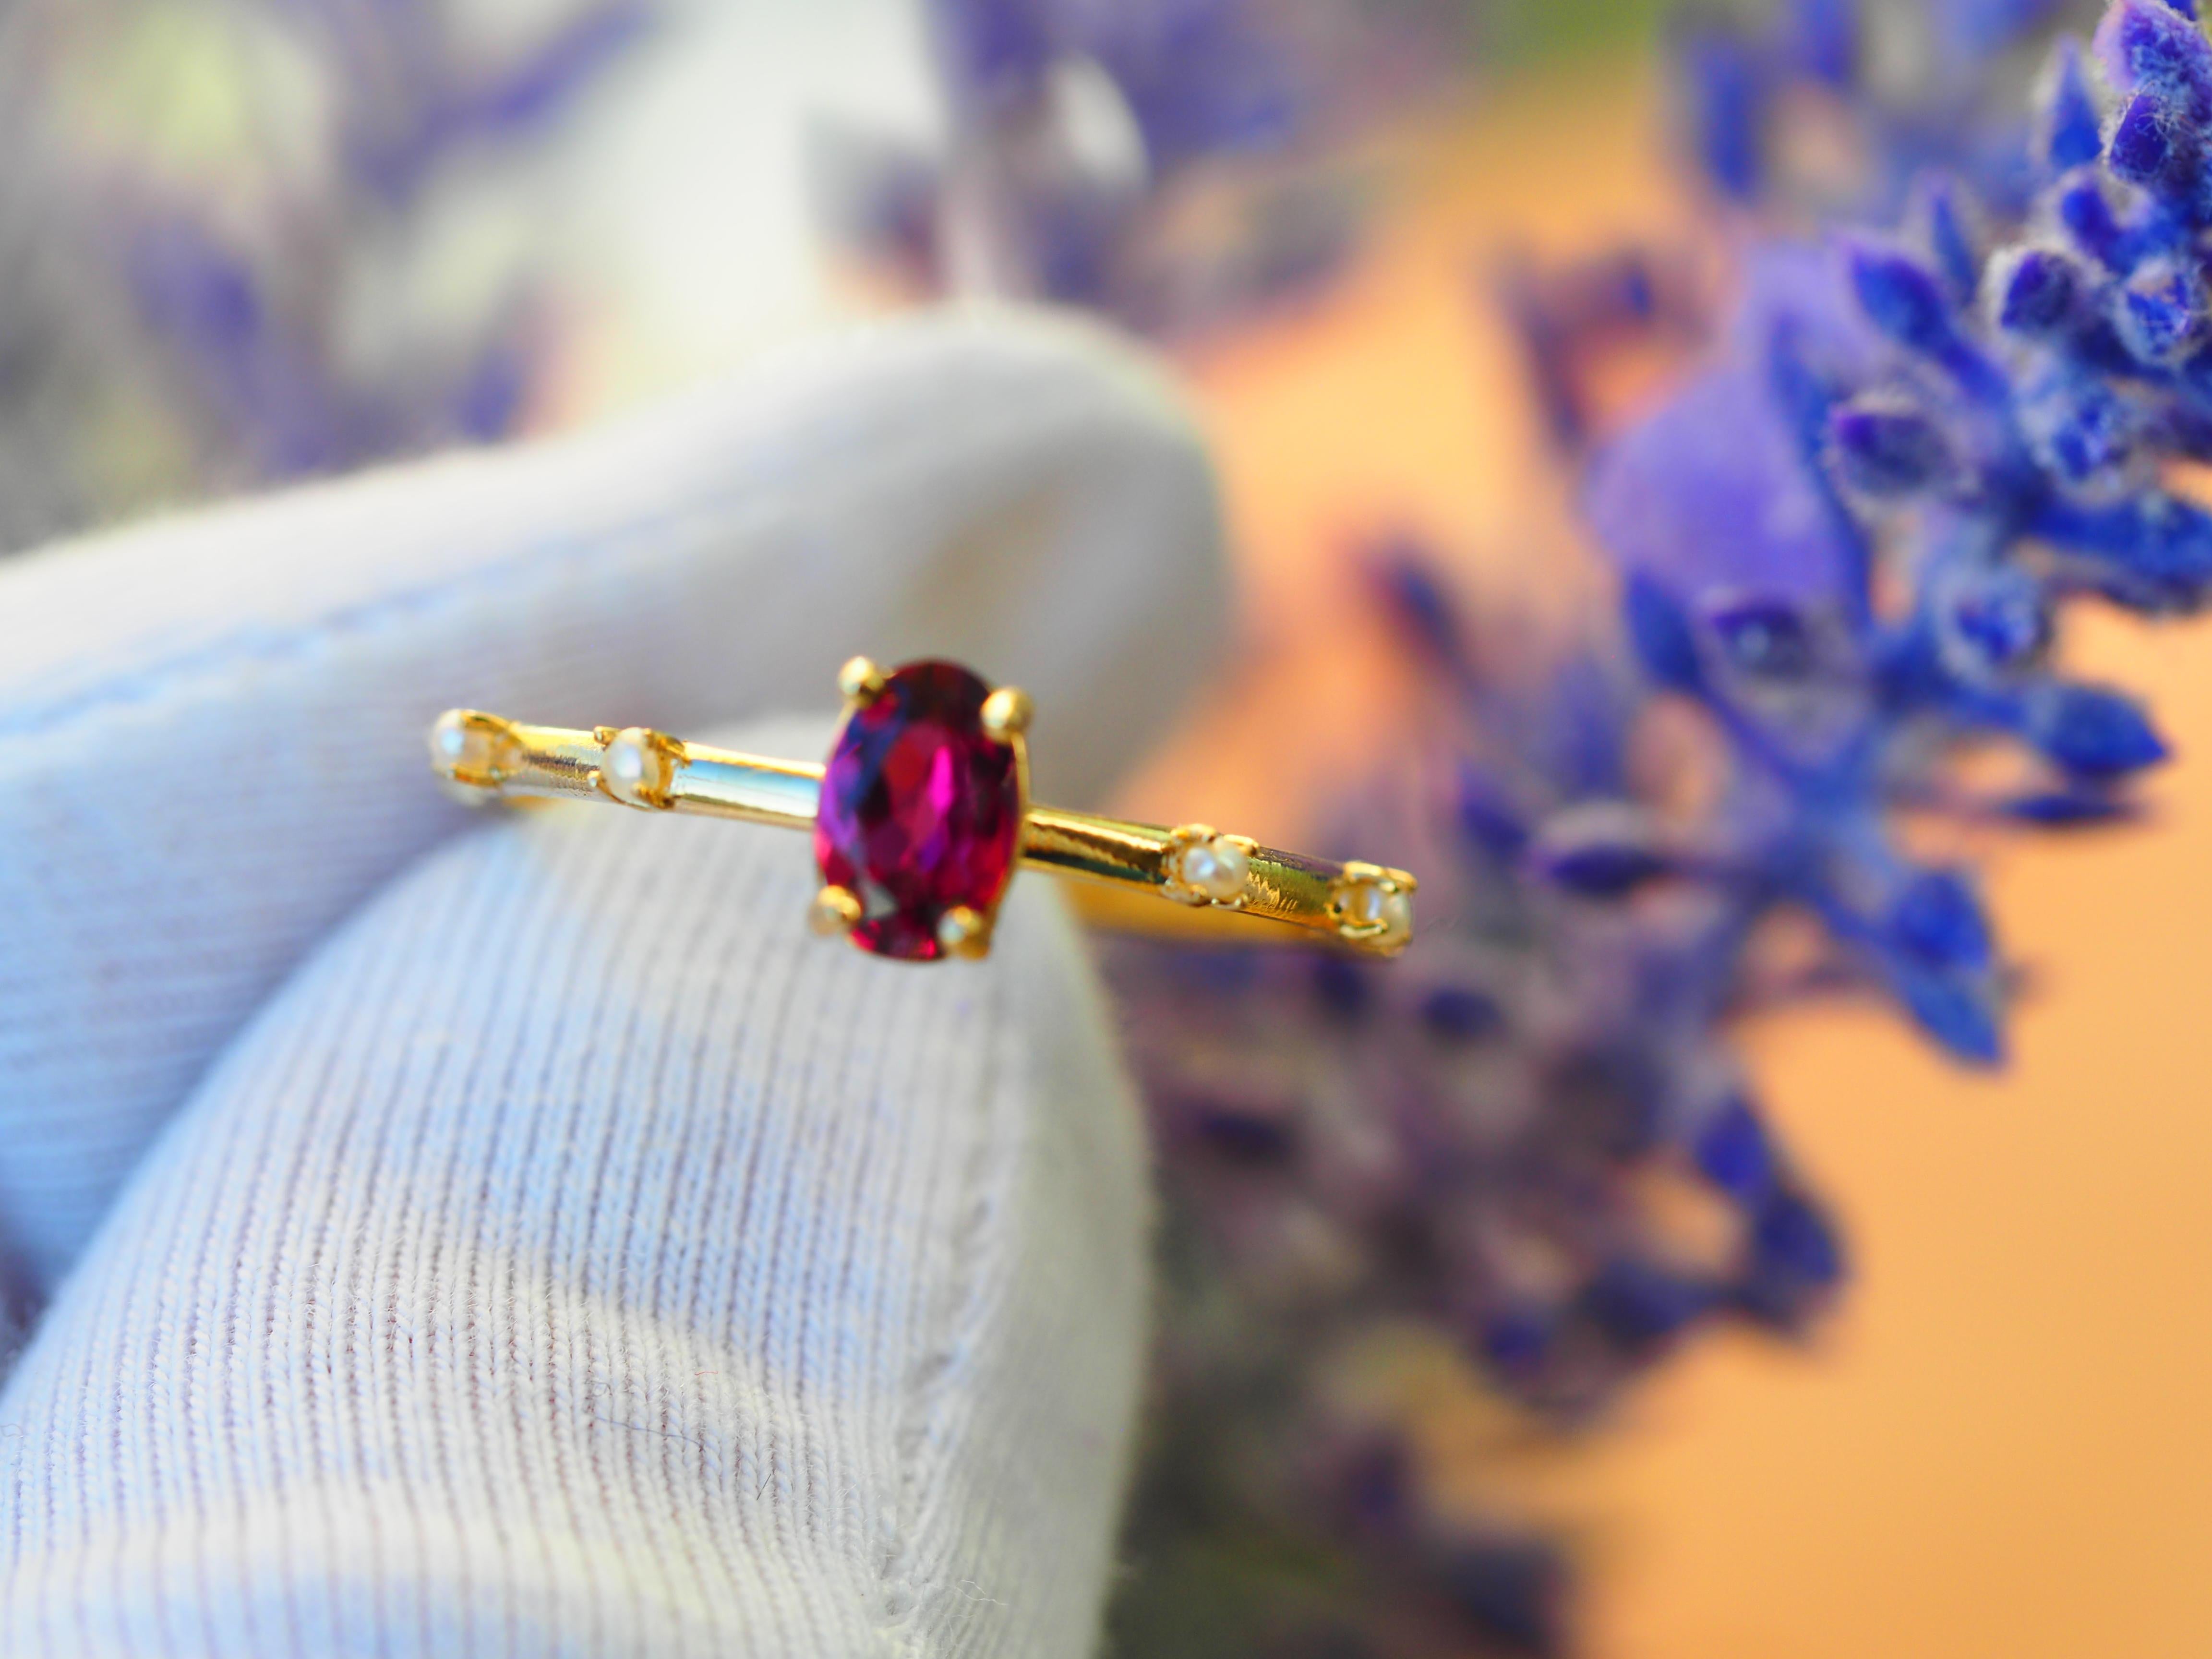 For Sale:  Garnet and pearls 14k gold ring. Eternity ring 13